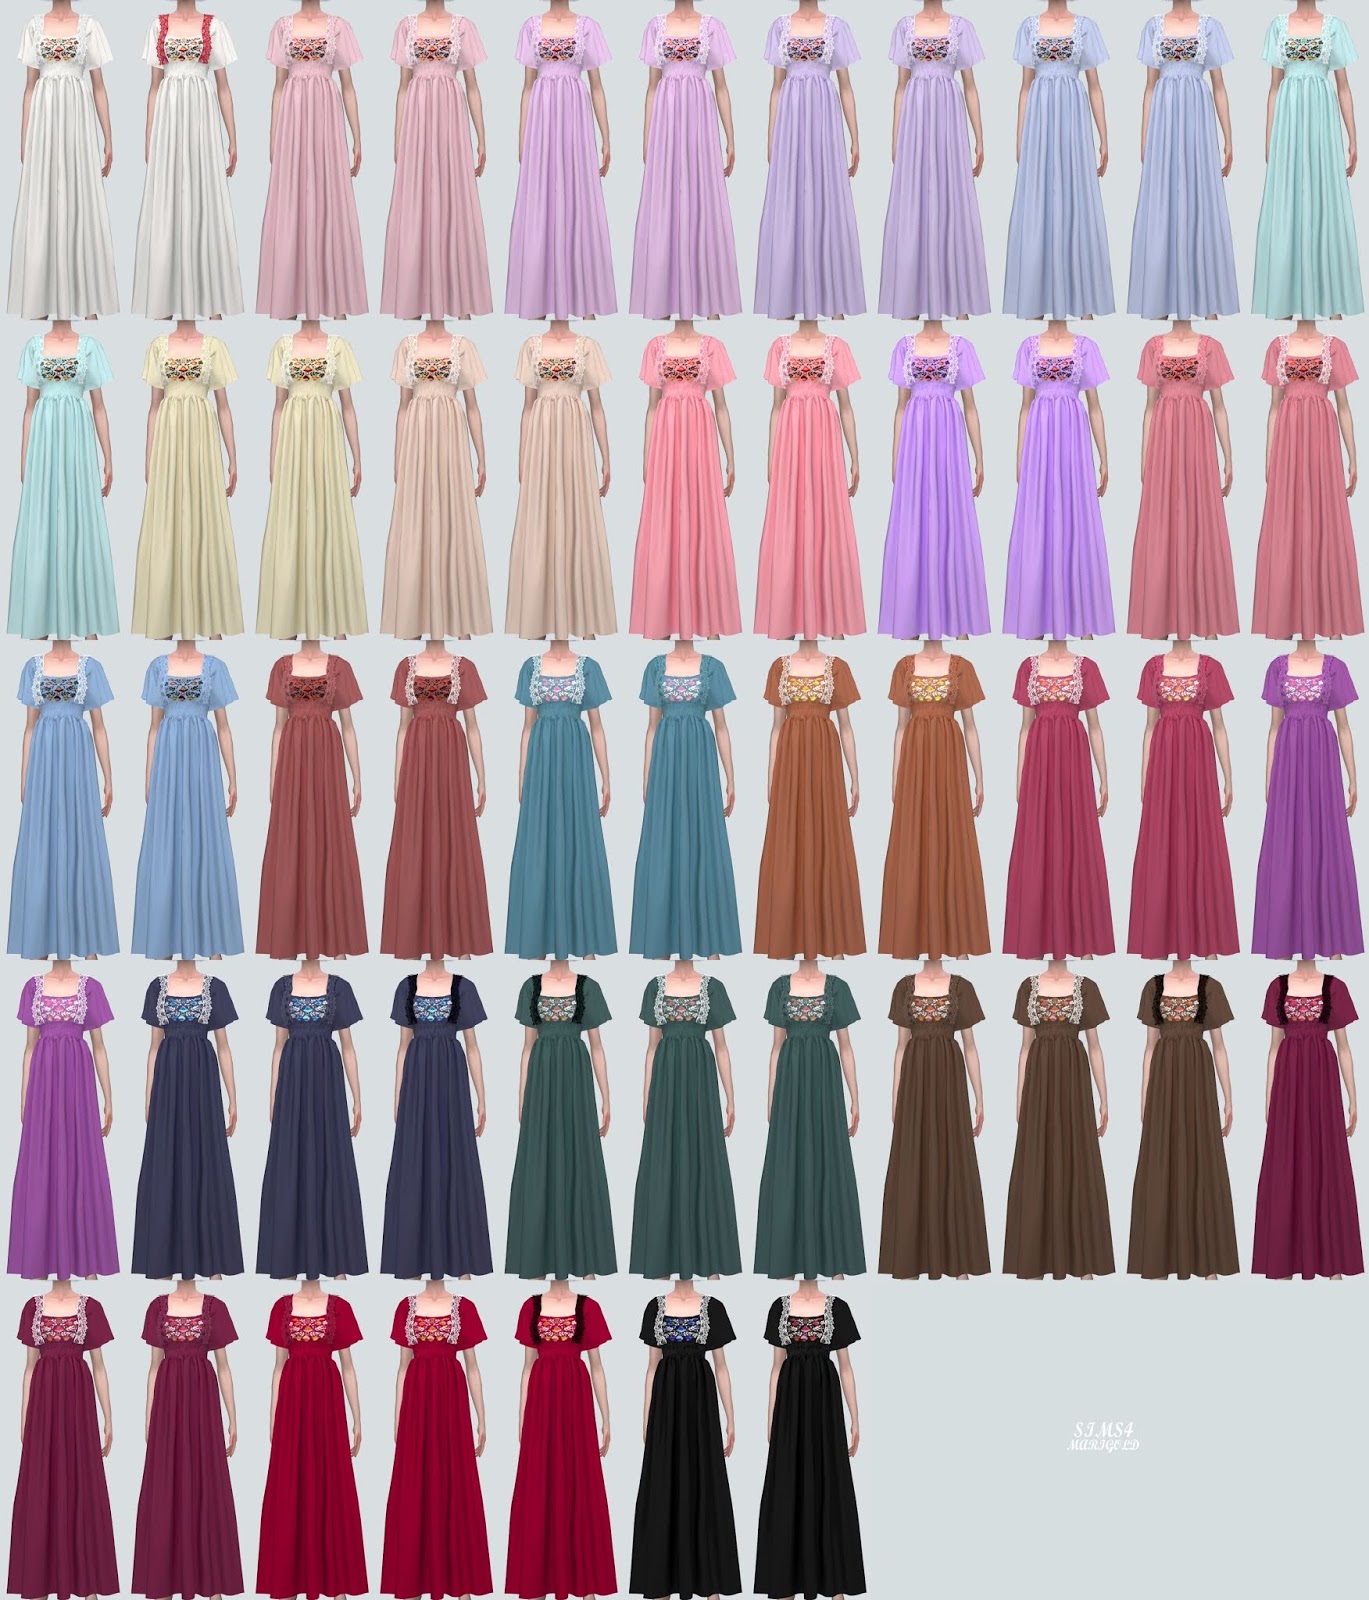 Long Trapeze Dress The Sims 4 _ P2 - SIMS4 Clove share Asia Tổng hợp ...